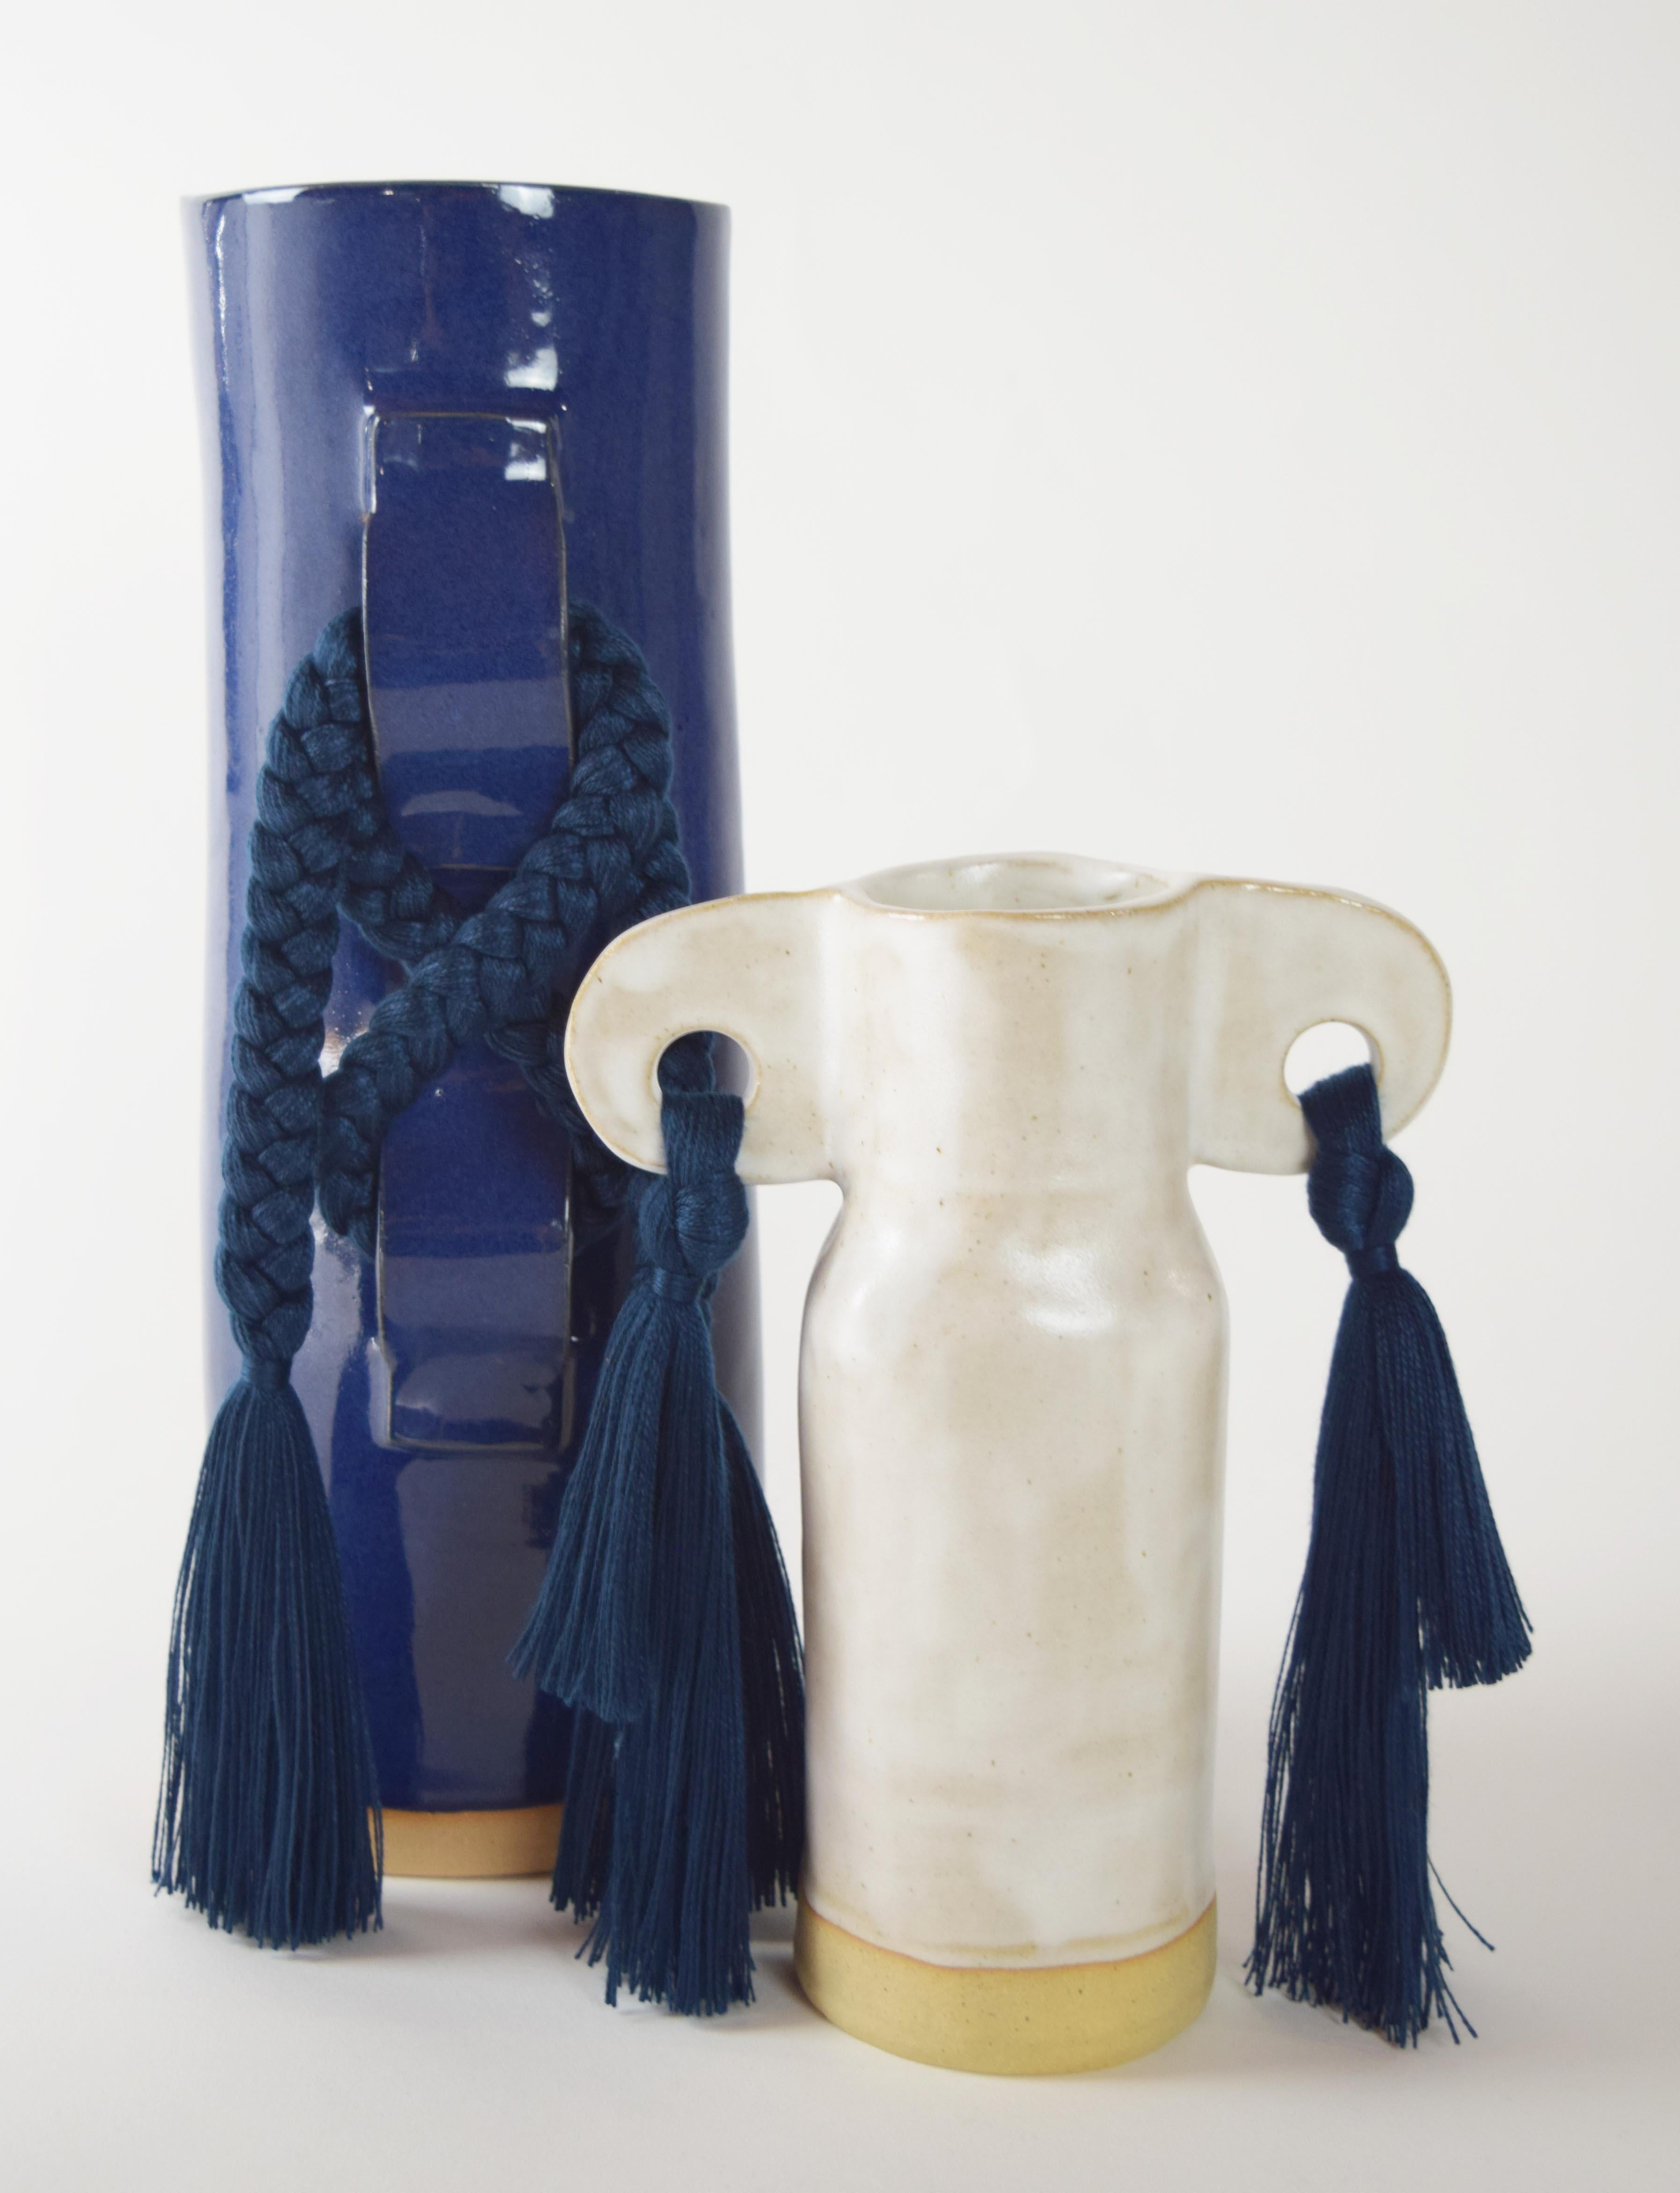 Contemporary Handmade Ceramic Vase #696 in Deep Blue with Navy Tencel Braid and Fringe For Sale